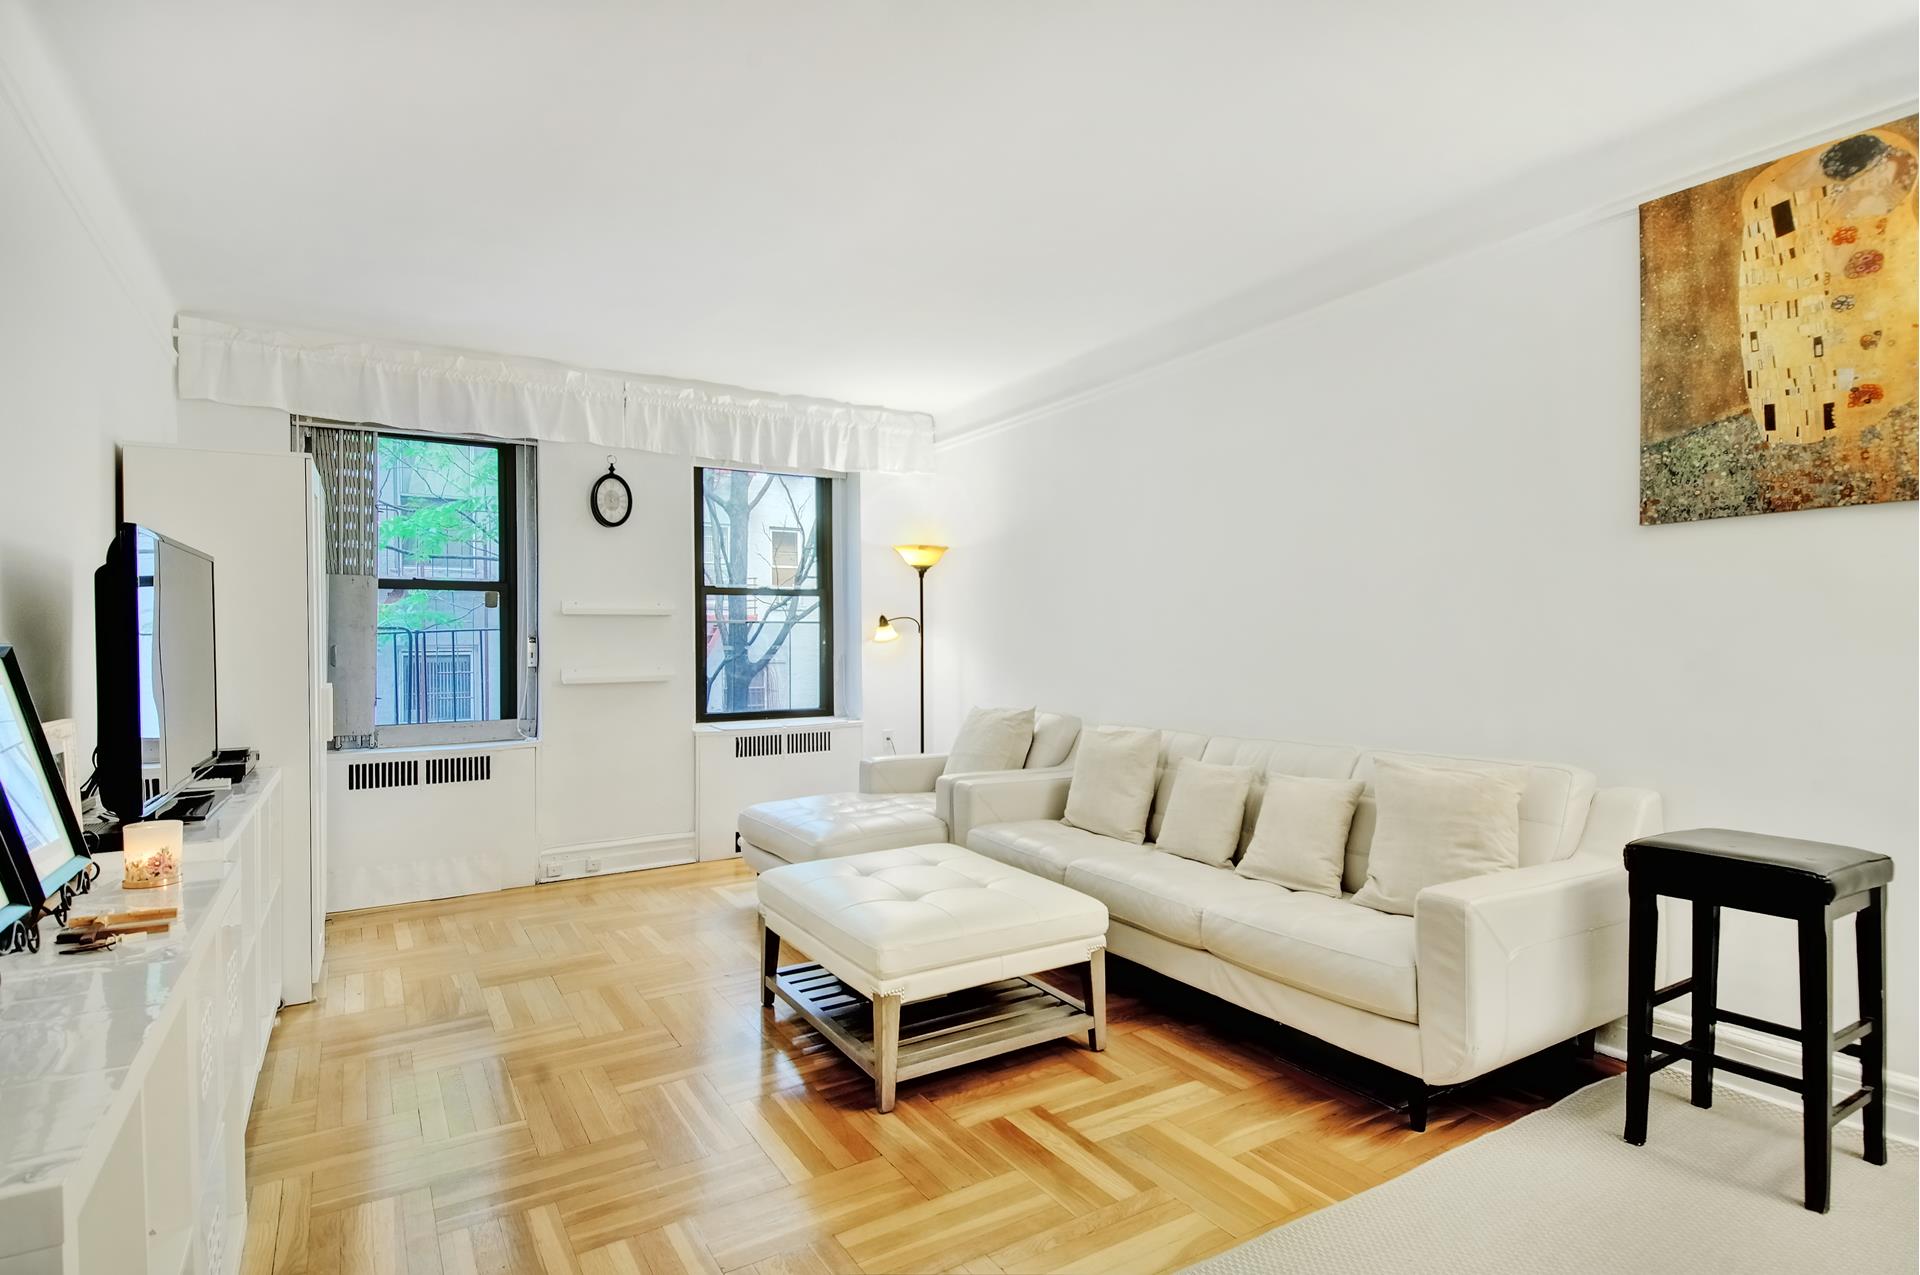 209 West 104th Street 6E, Upper West Side, Upper West Side, NYC - 1 Bedrooms  
1 Bathrooms  
3 Rooms - 